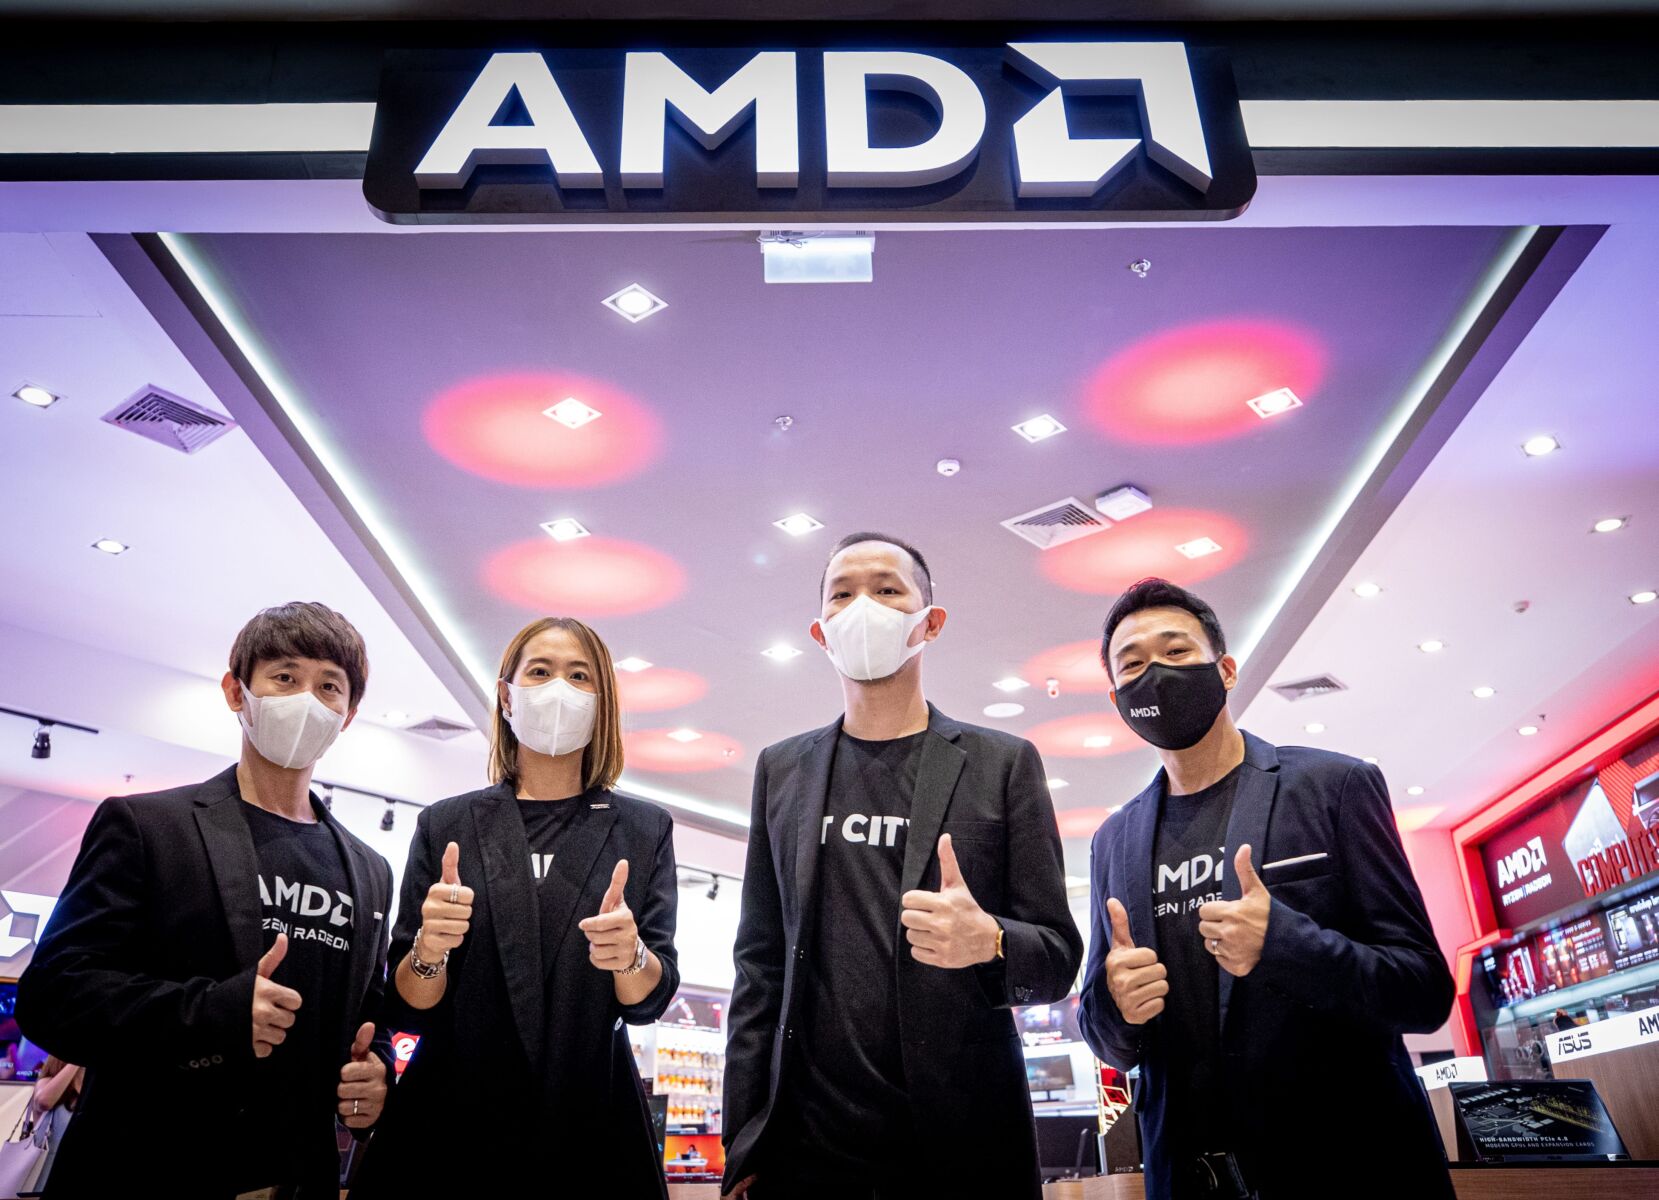 AMD x IT City Exclusive Store